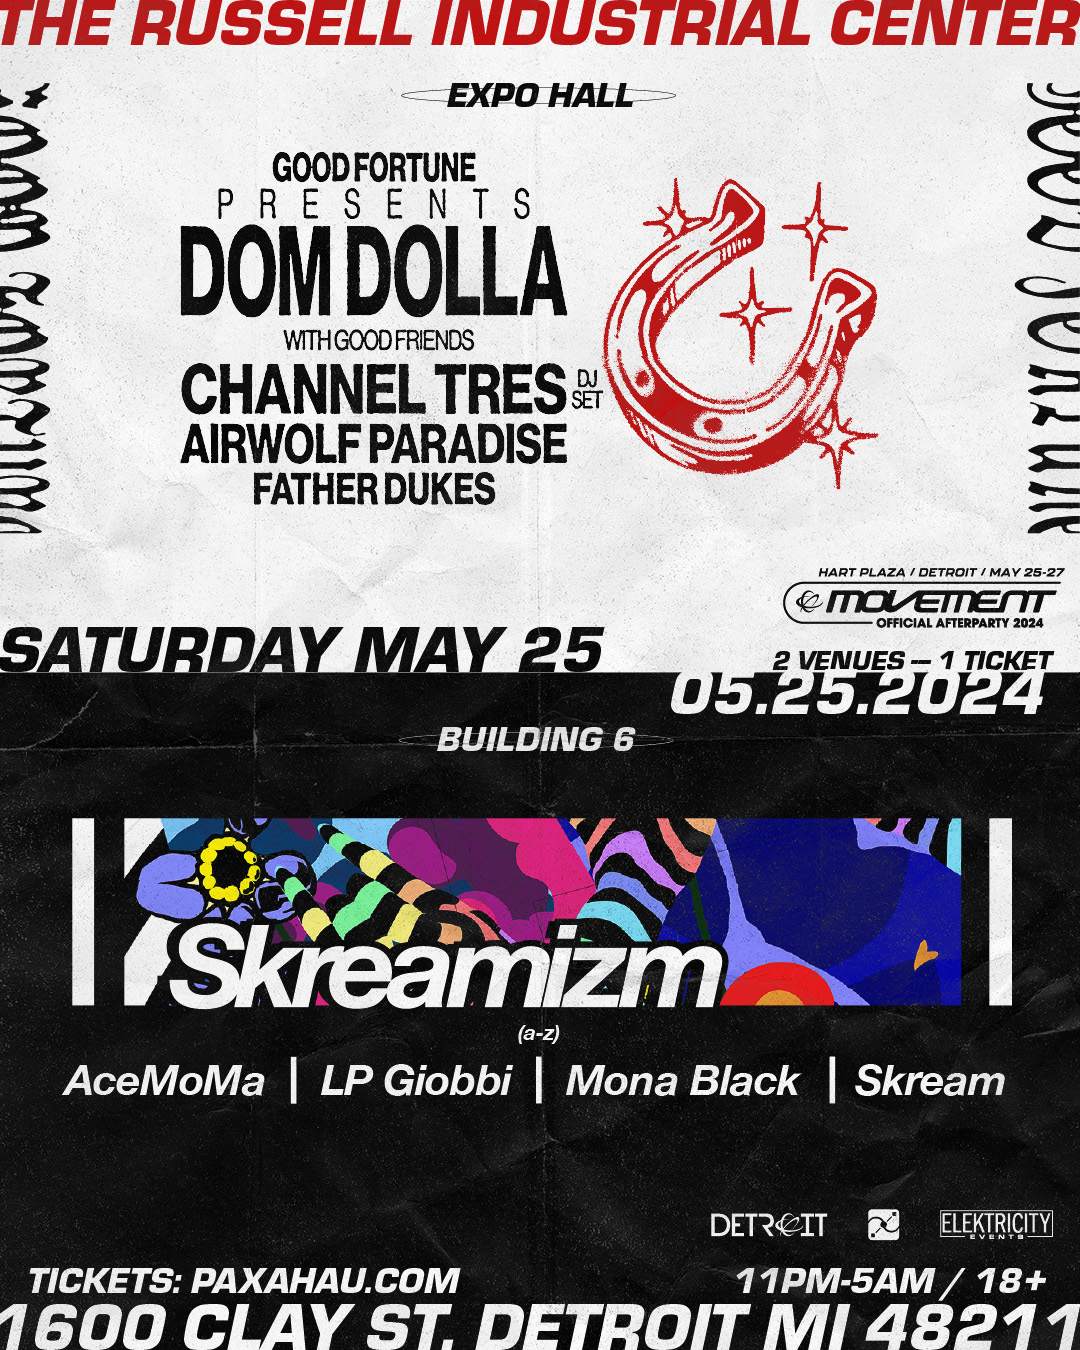 Good Fortune presents Dom Dolla & Skreamizm - Official Movement Afterparty - フライヤー表